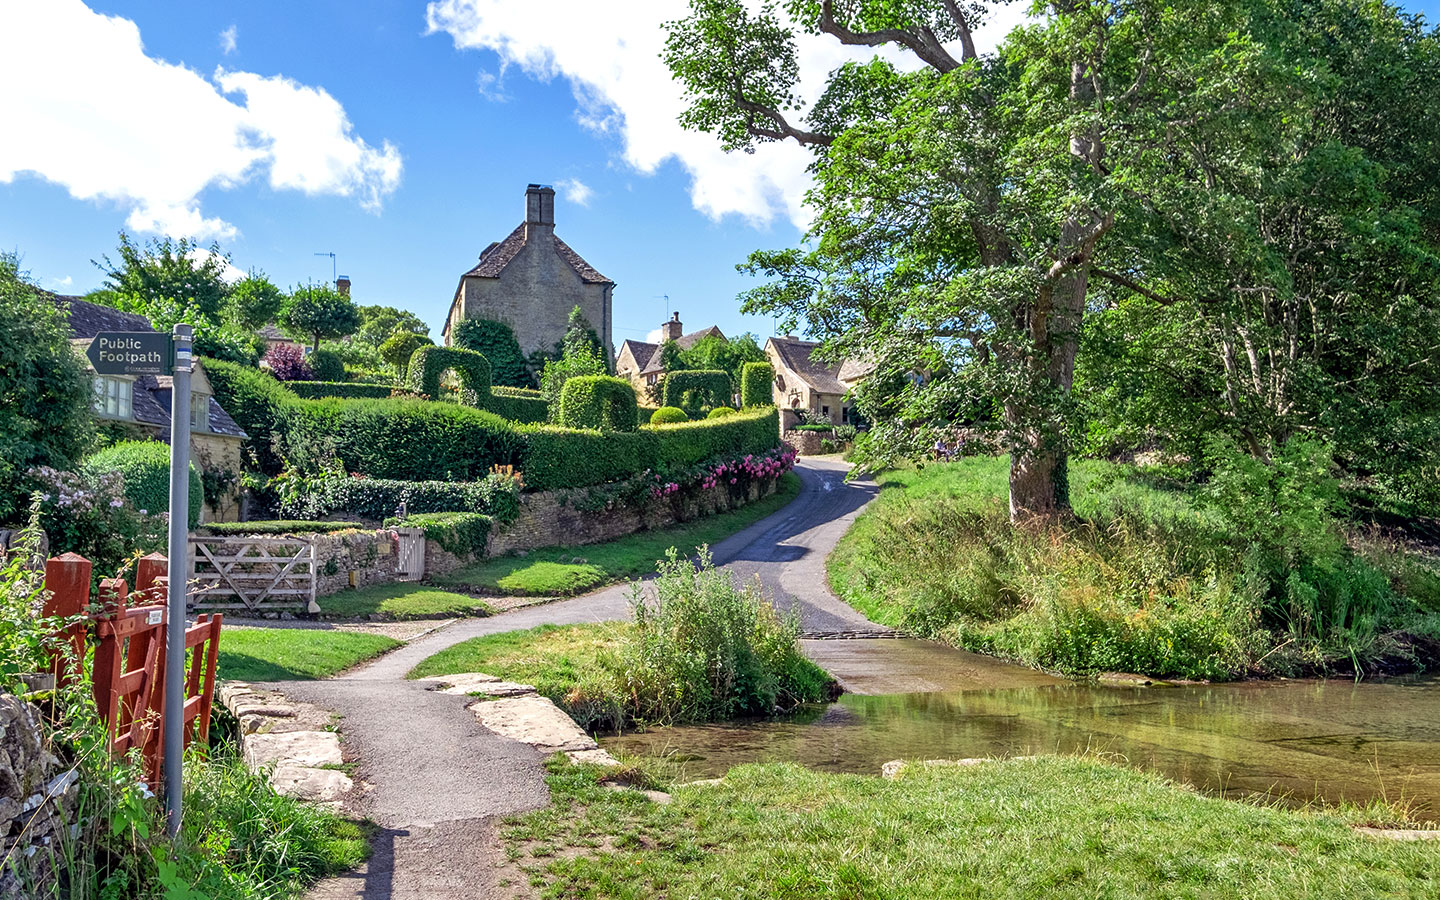 Things to do in Upper Slaughter, Cotswolds: A local’s guide